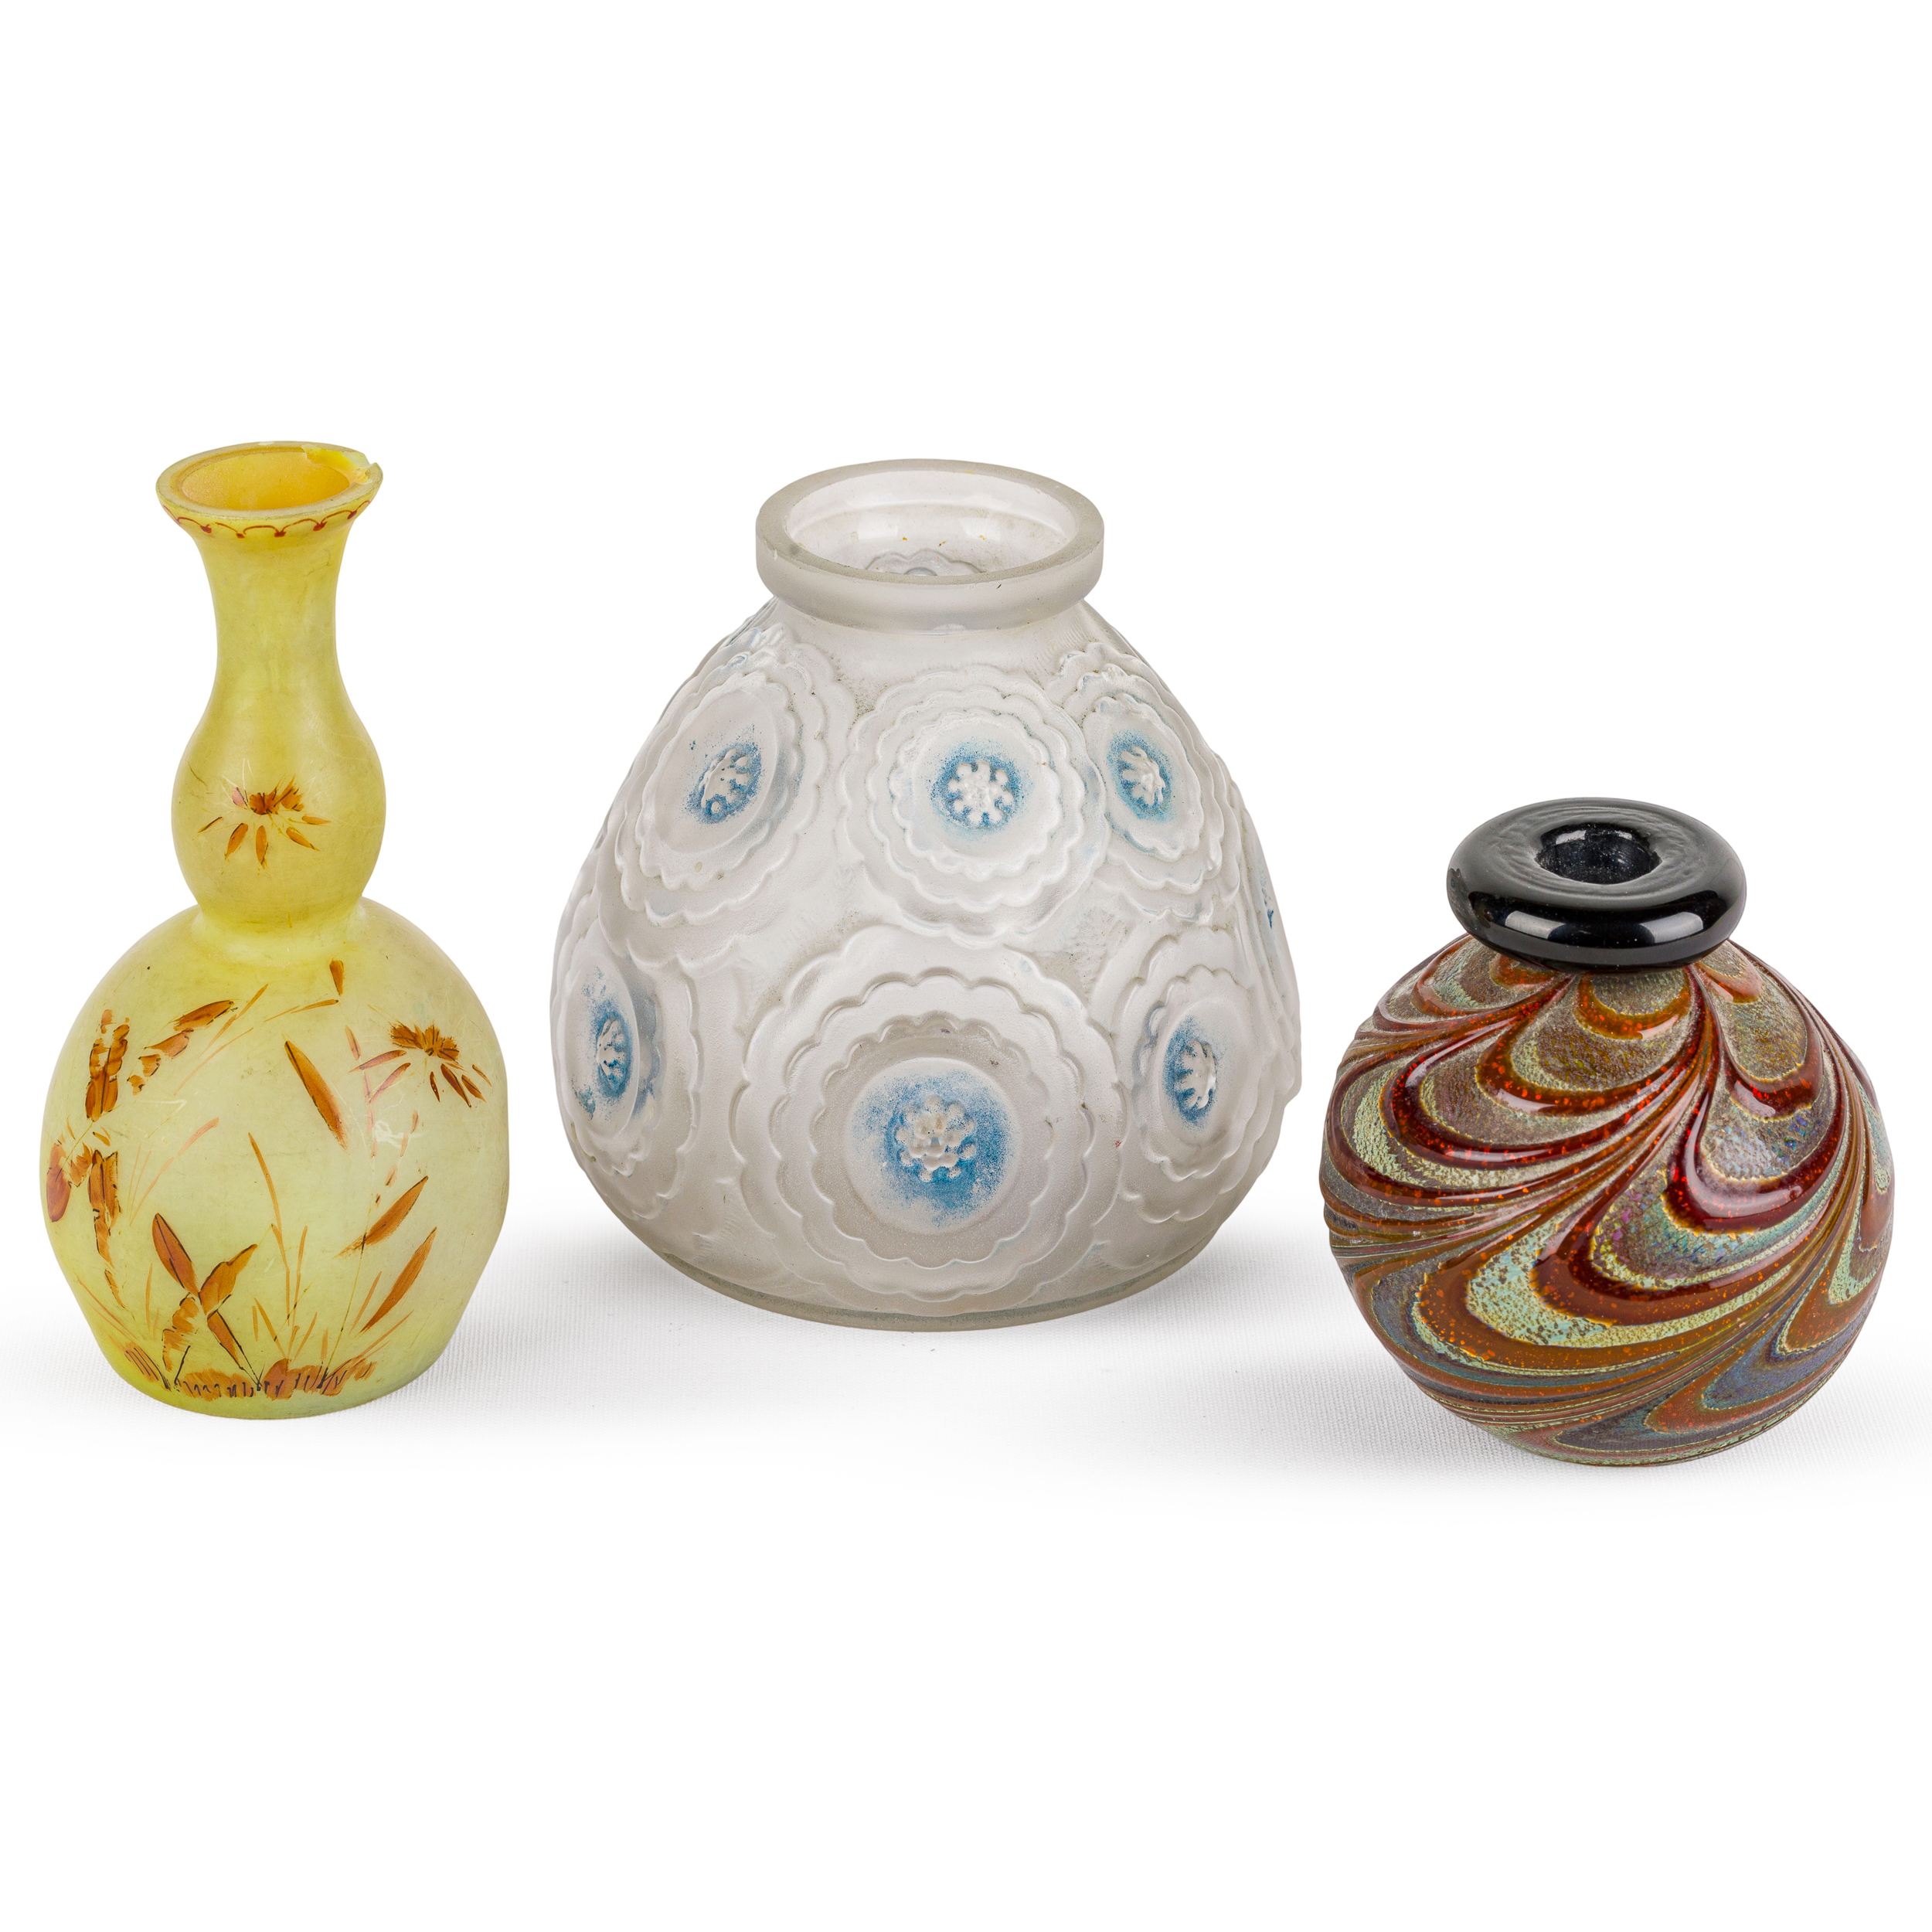 THREE GLASS VASES, 20TH CENTURY; WORN, MINOR SCRATCHES, ONE WITH A CHIP (3)